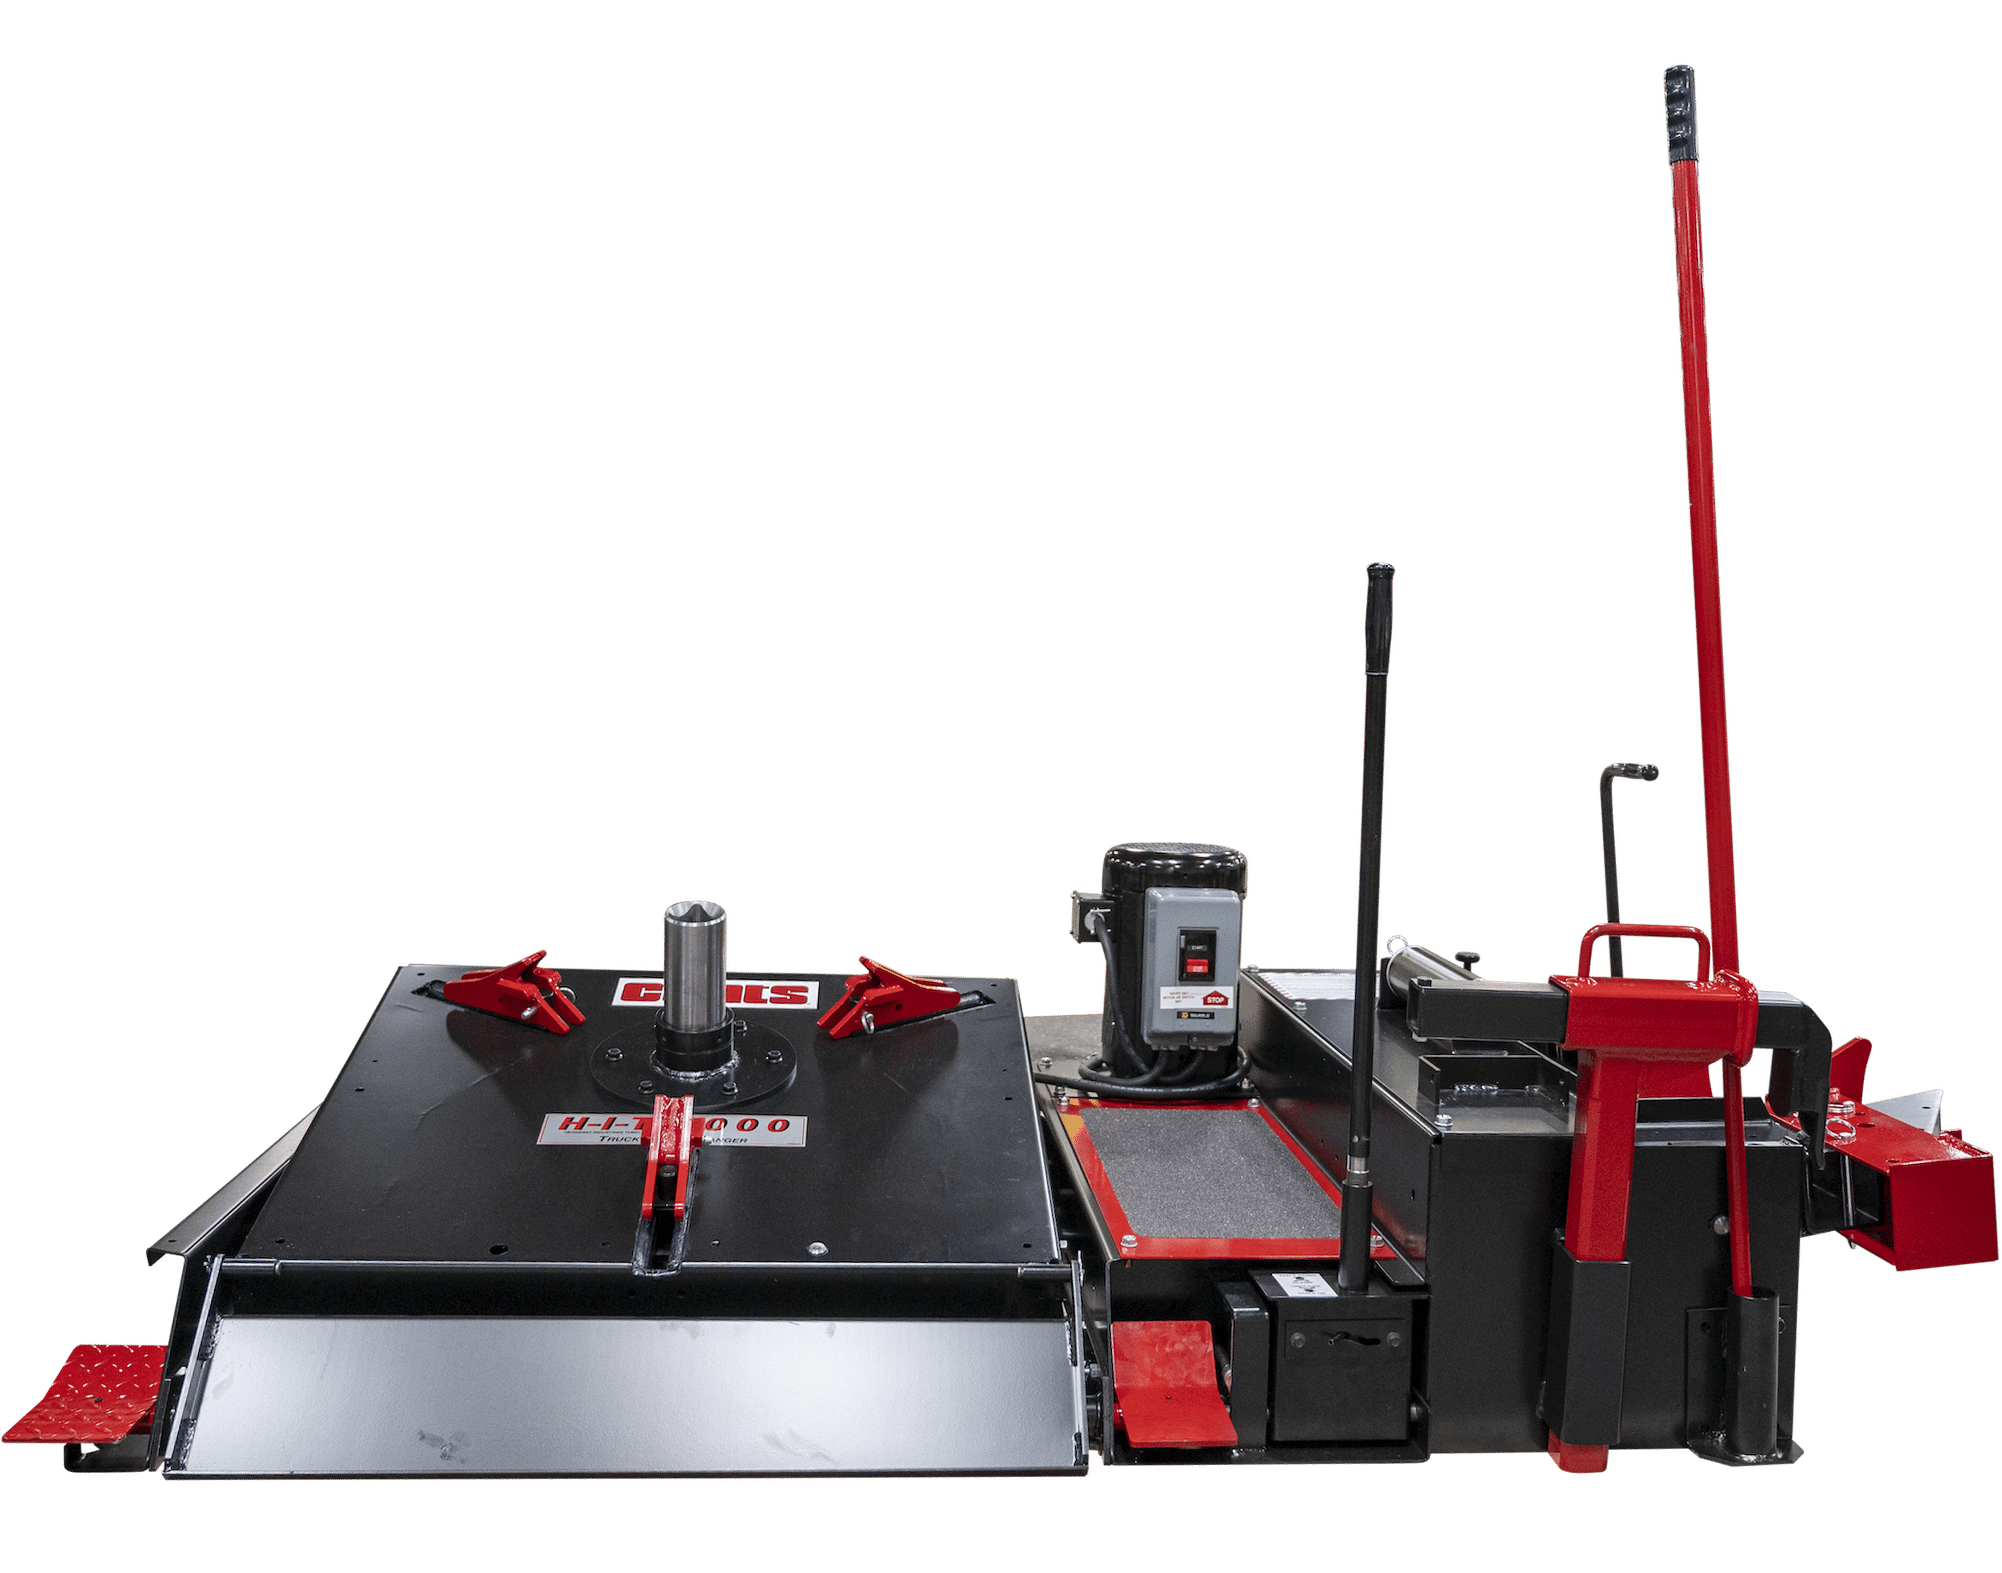 A red and black heavy duty tire changer that is low to the ground